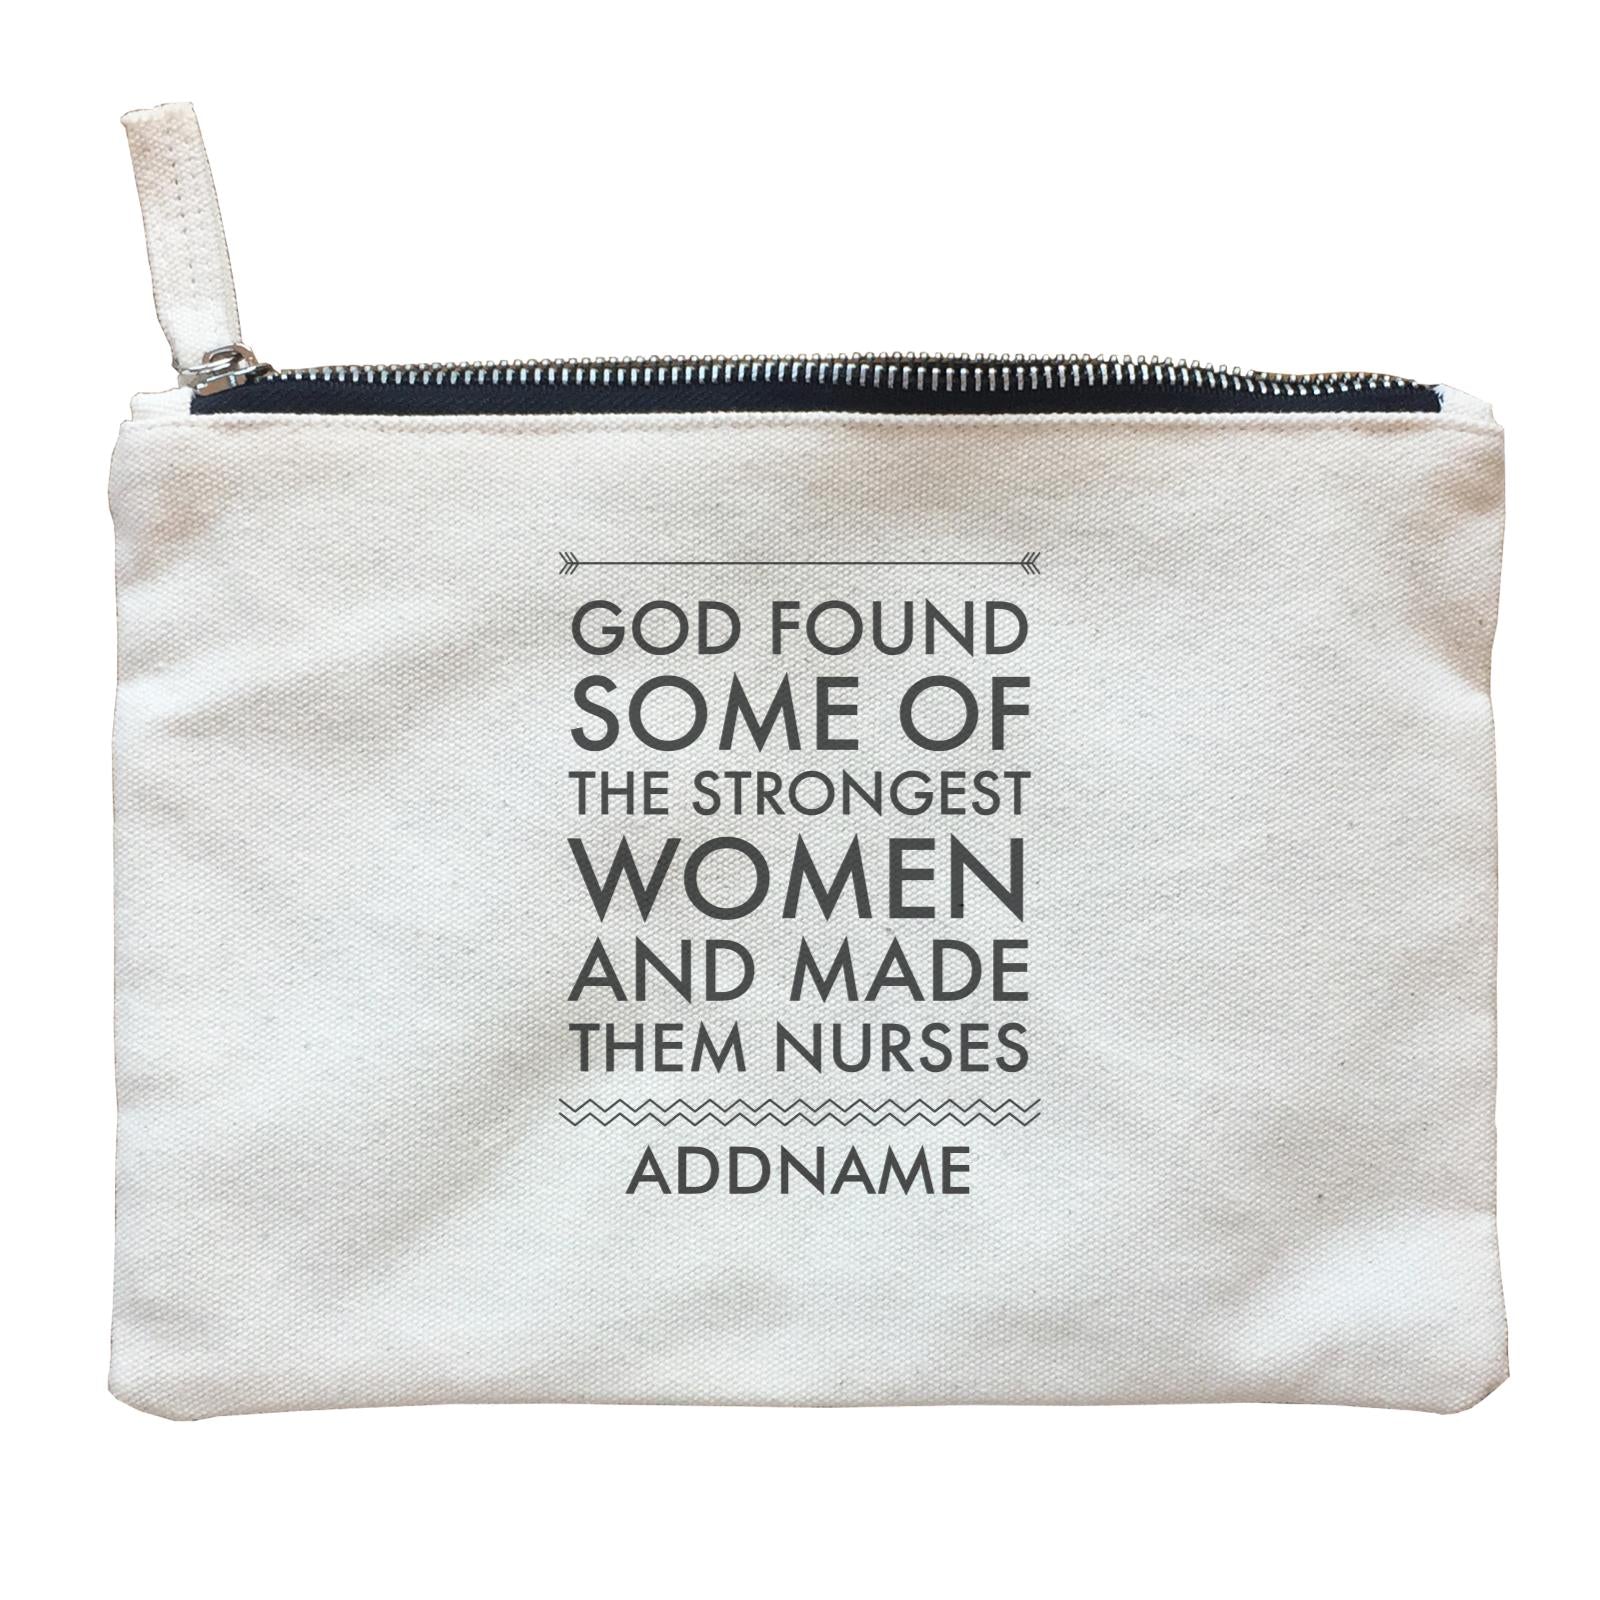 Nurse Quotes God Found Some Of The Strongest Woman And Made Them Nurses Addname Zipper Pouch